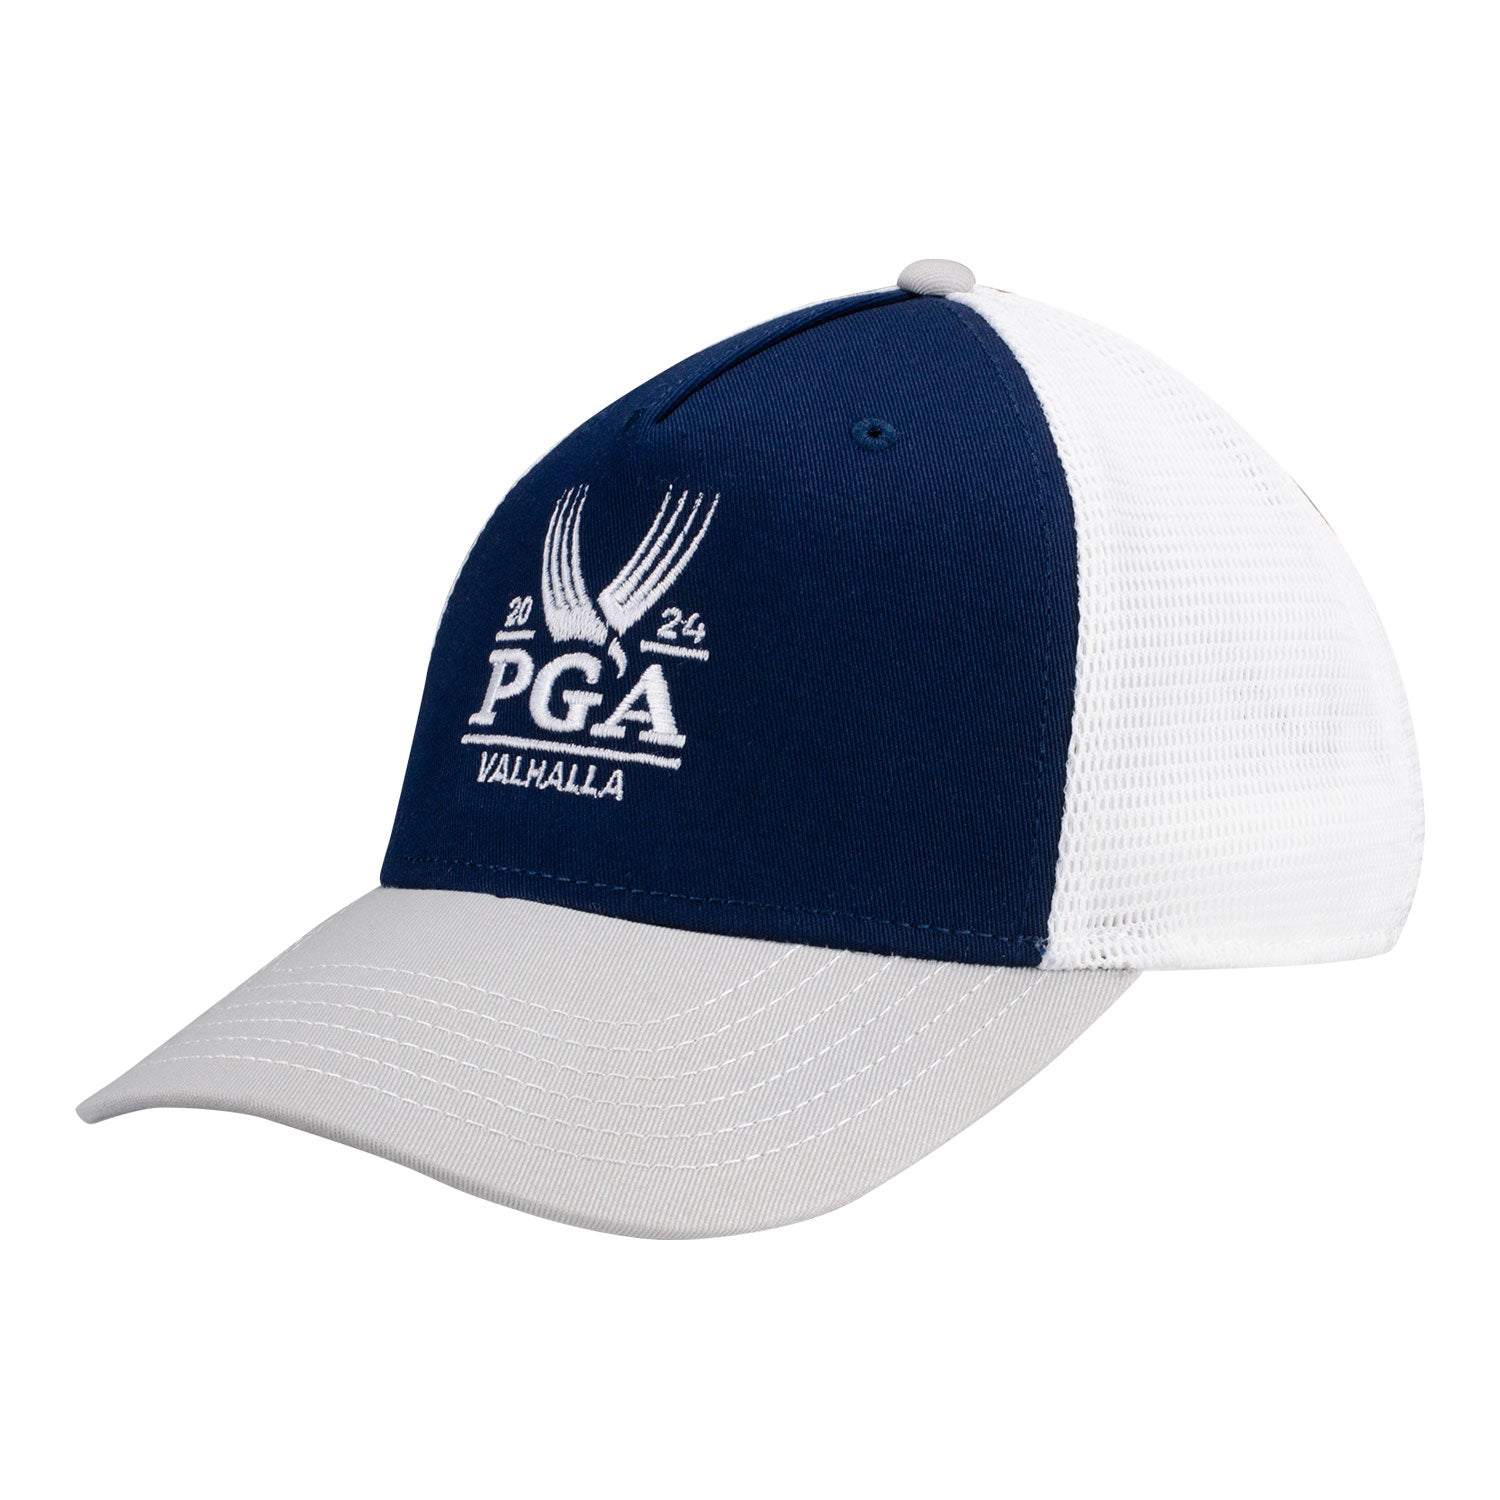 Ahead 2024 PGA Championship Classic - Fit Cotton Twill Mesh Back Adjustable Hat in Navy / Grey / White - Angled Front Right View